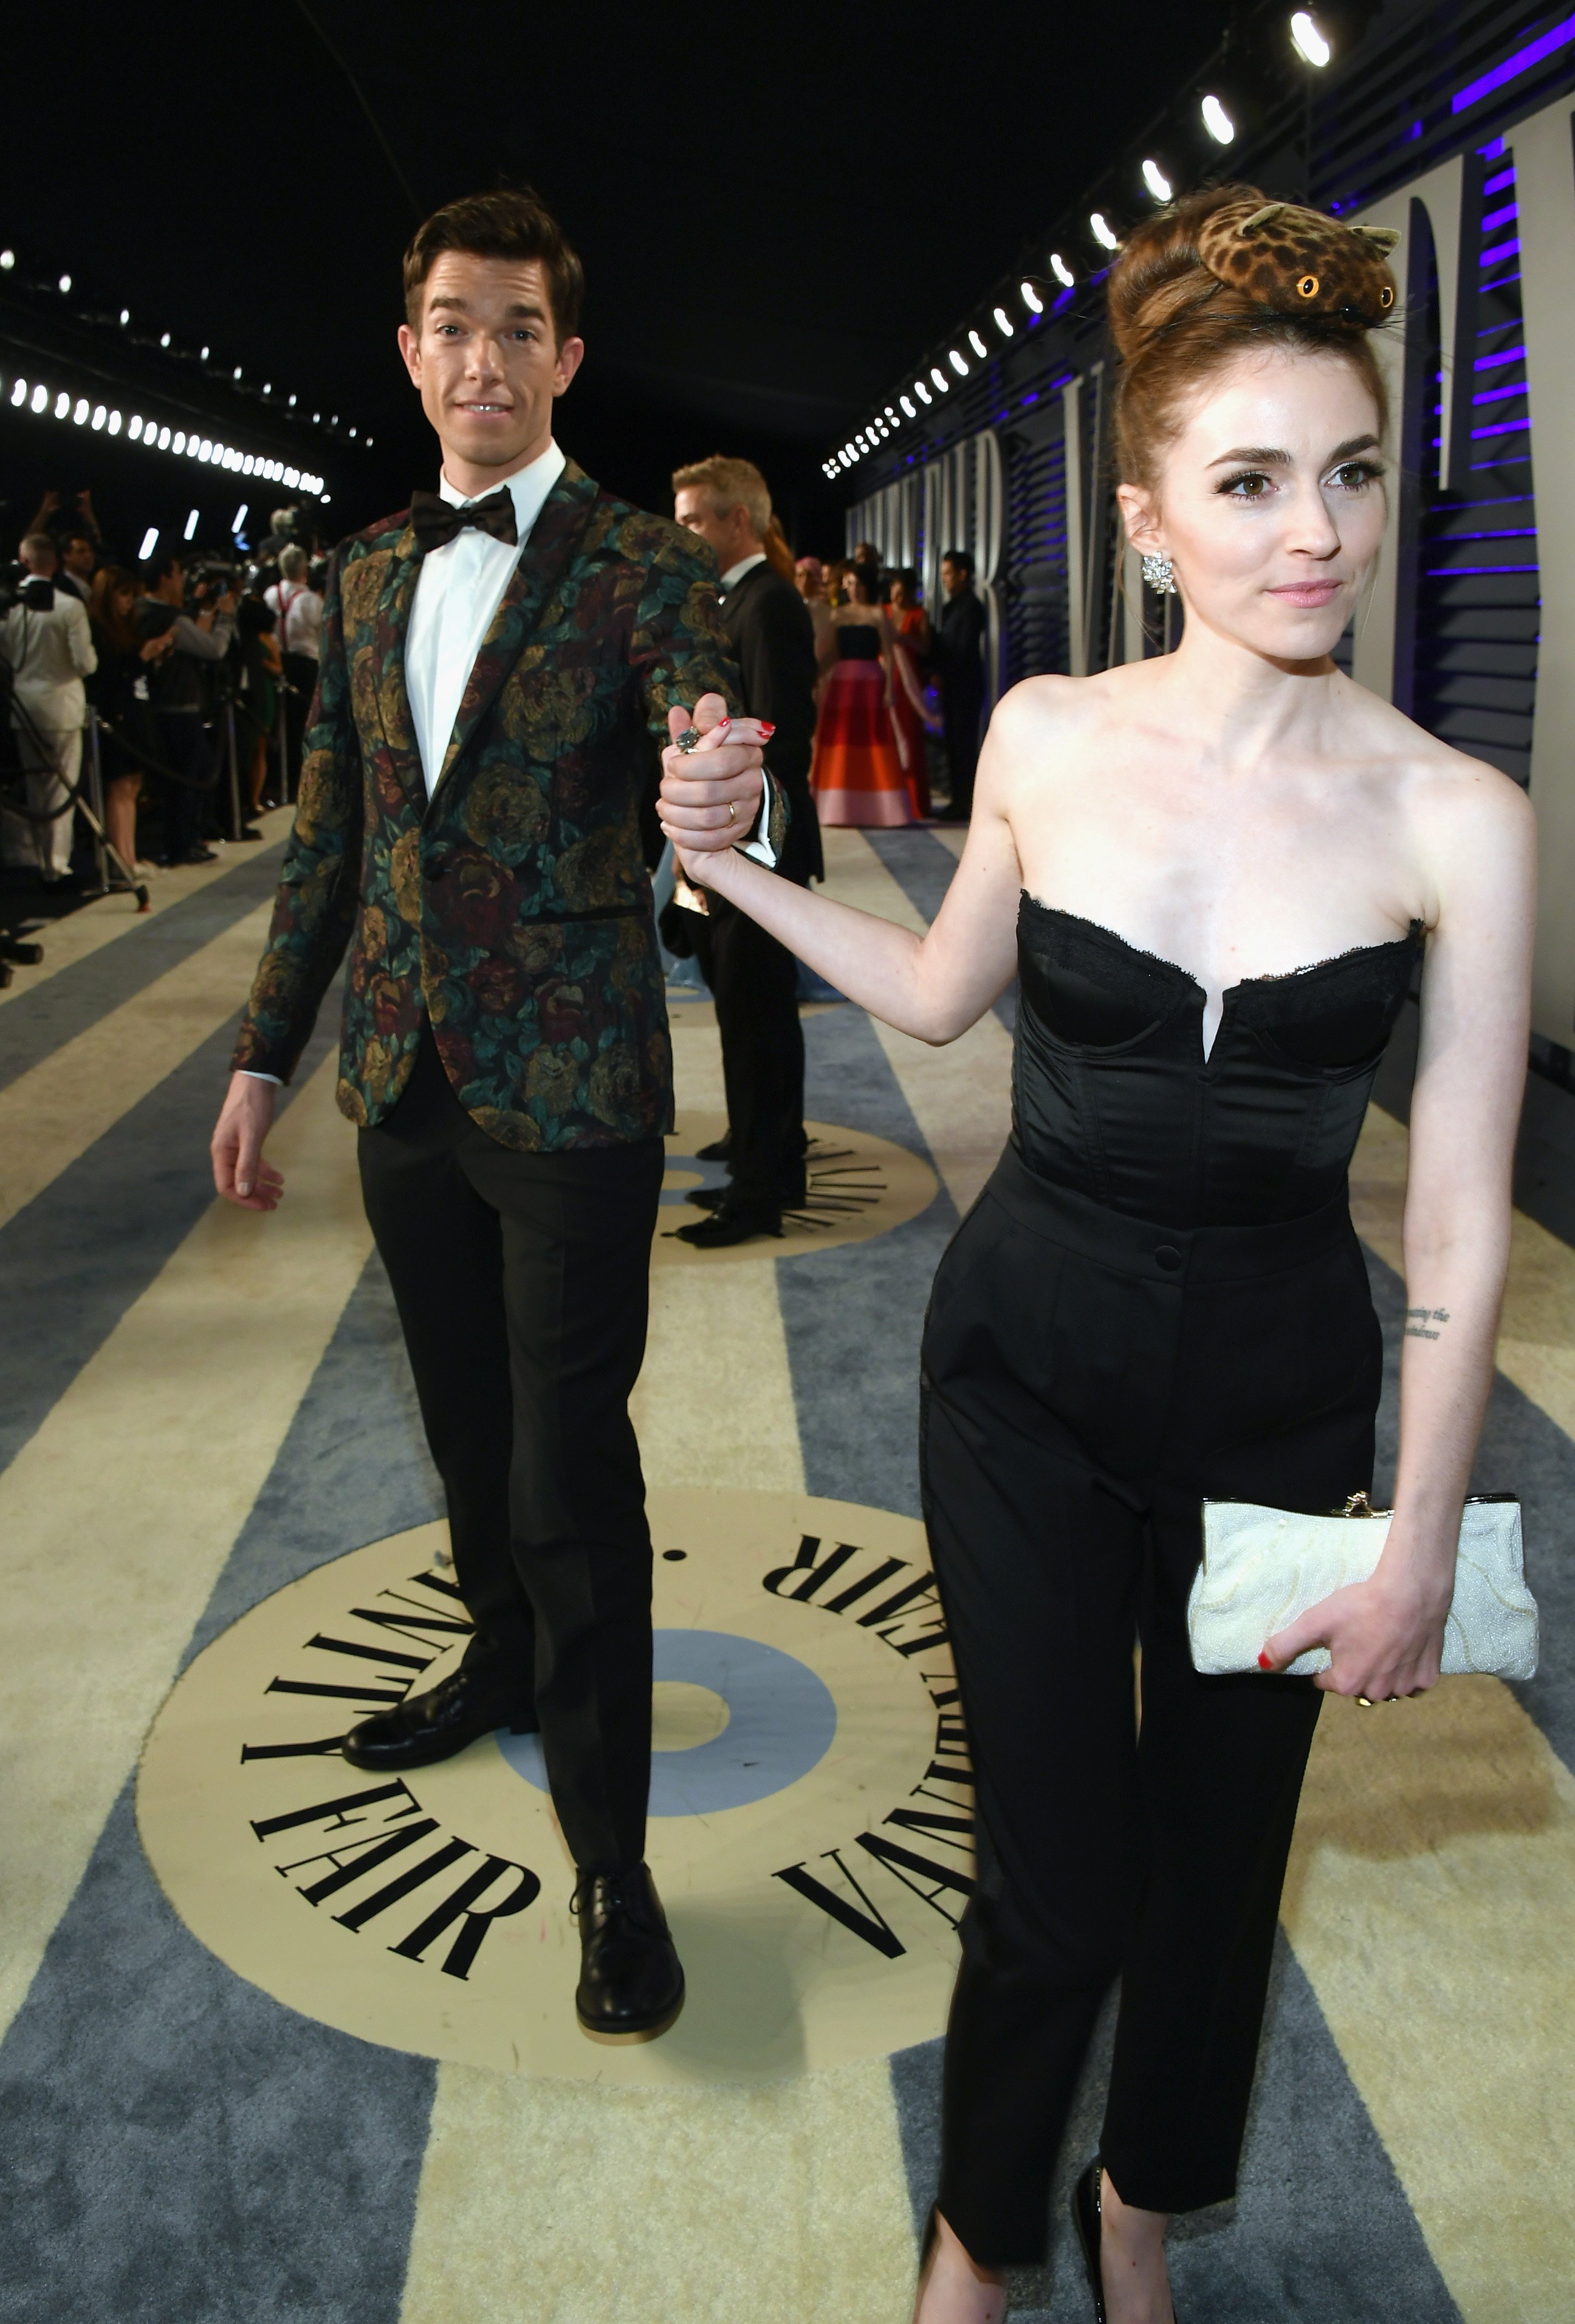 John Mulaney is lead by his wife, Annamarie Tendler, into the 2019 Vanity Fiar Oscar Party hosted by Radhika Jones